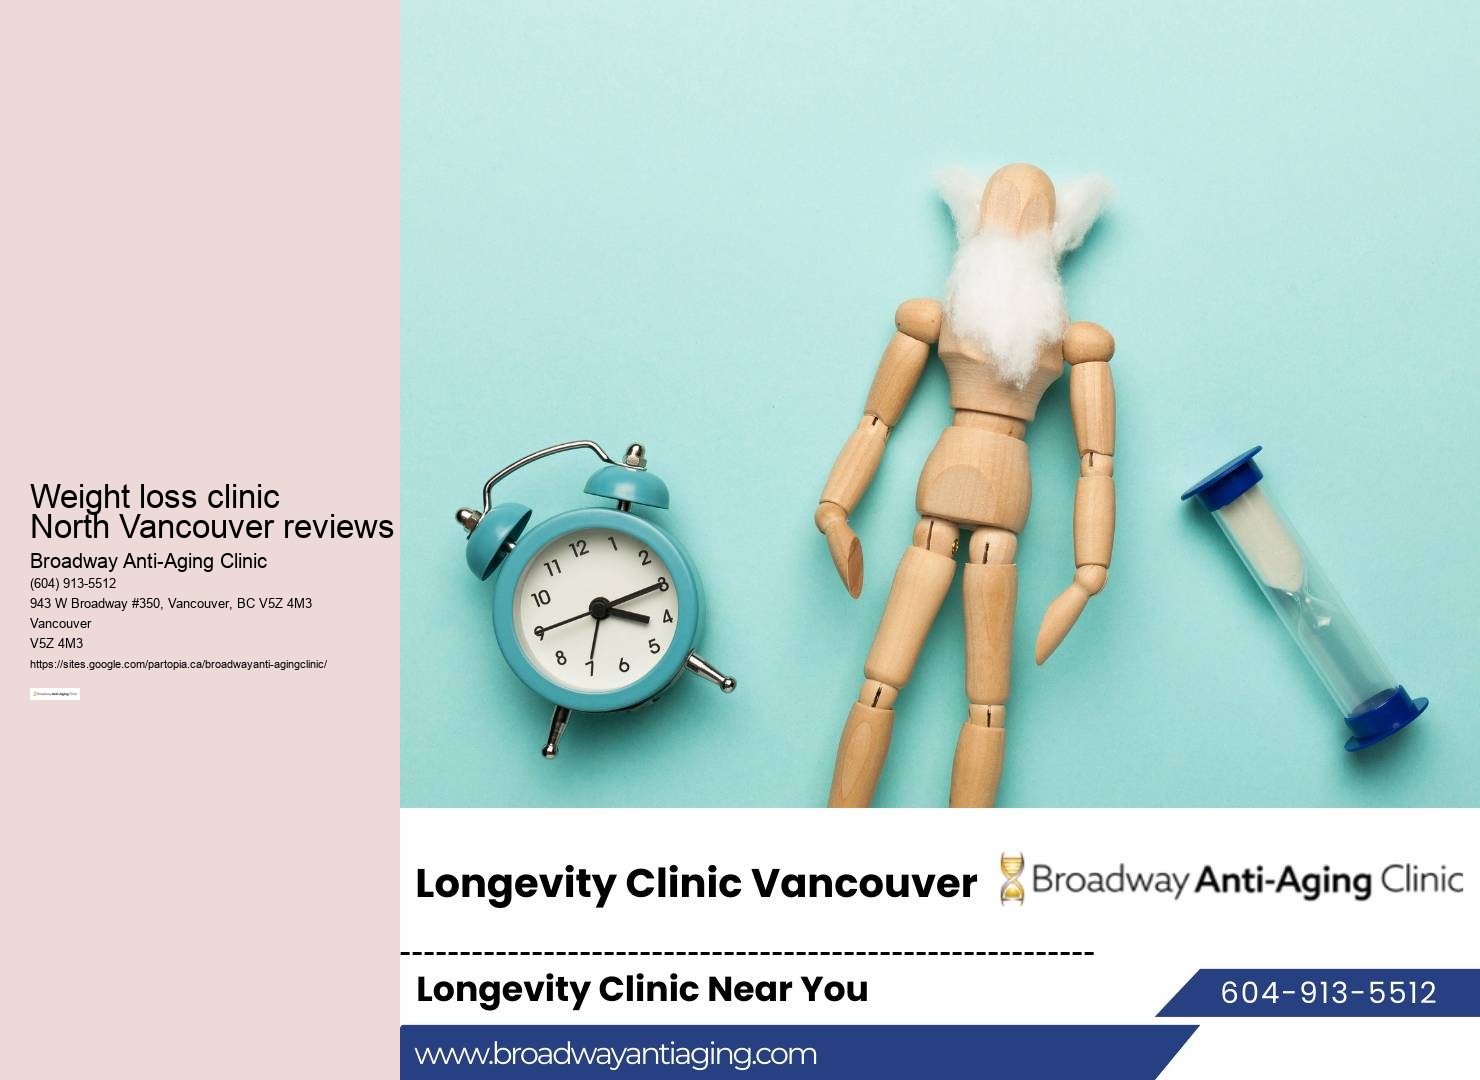 Weight loss clinic North Vancouver offers